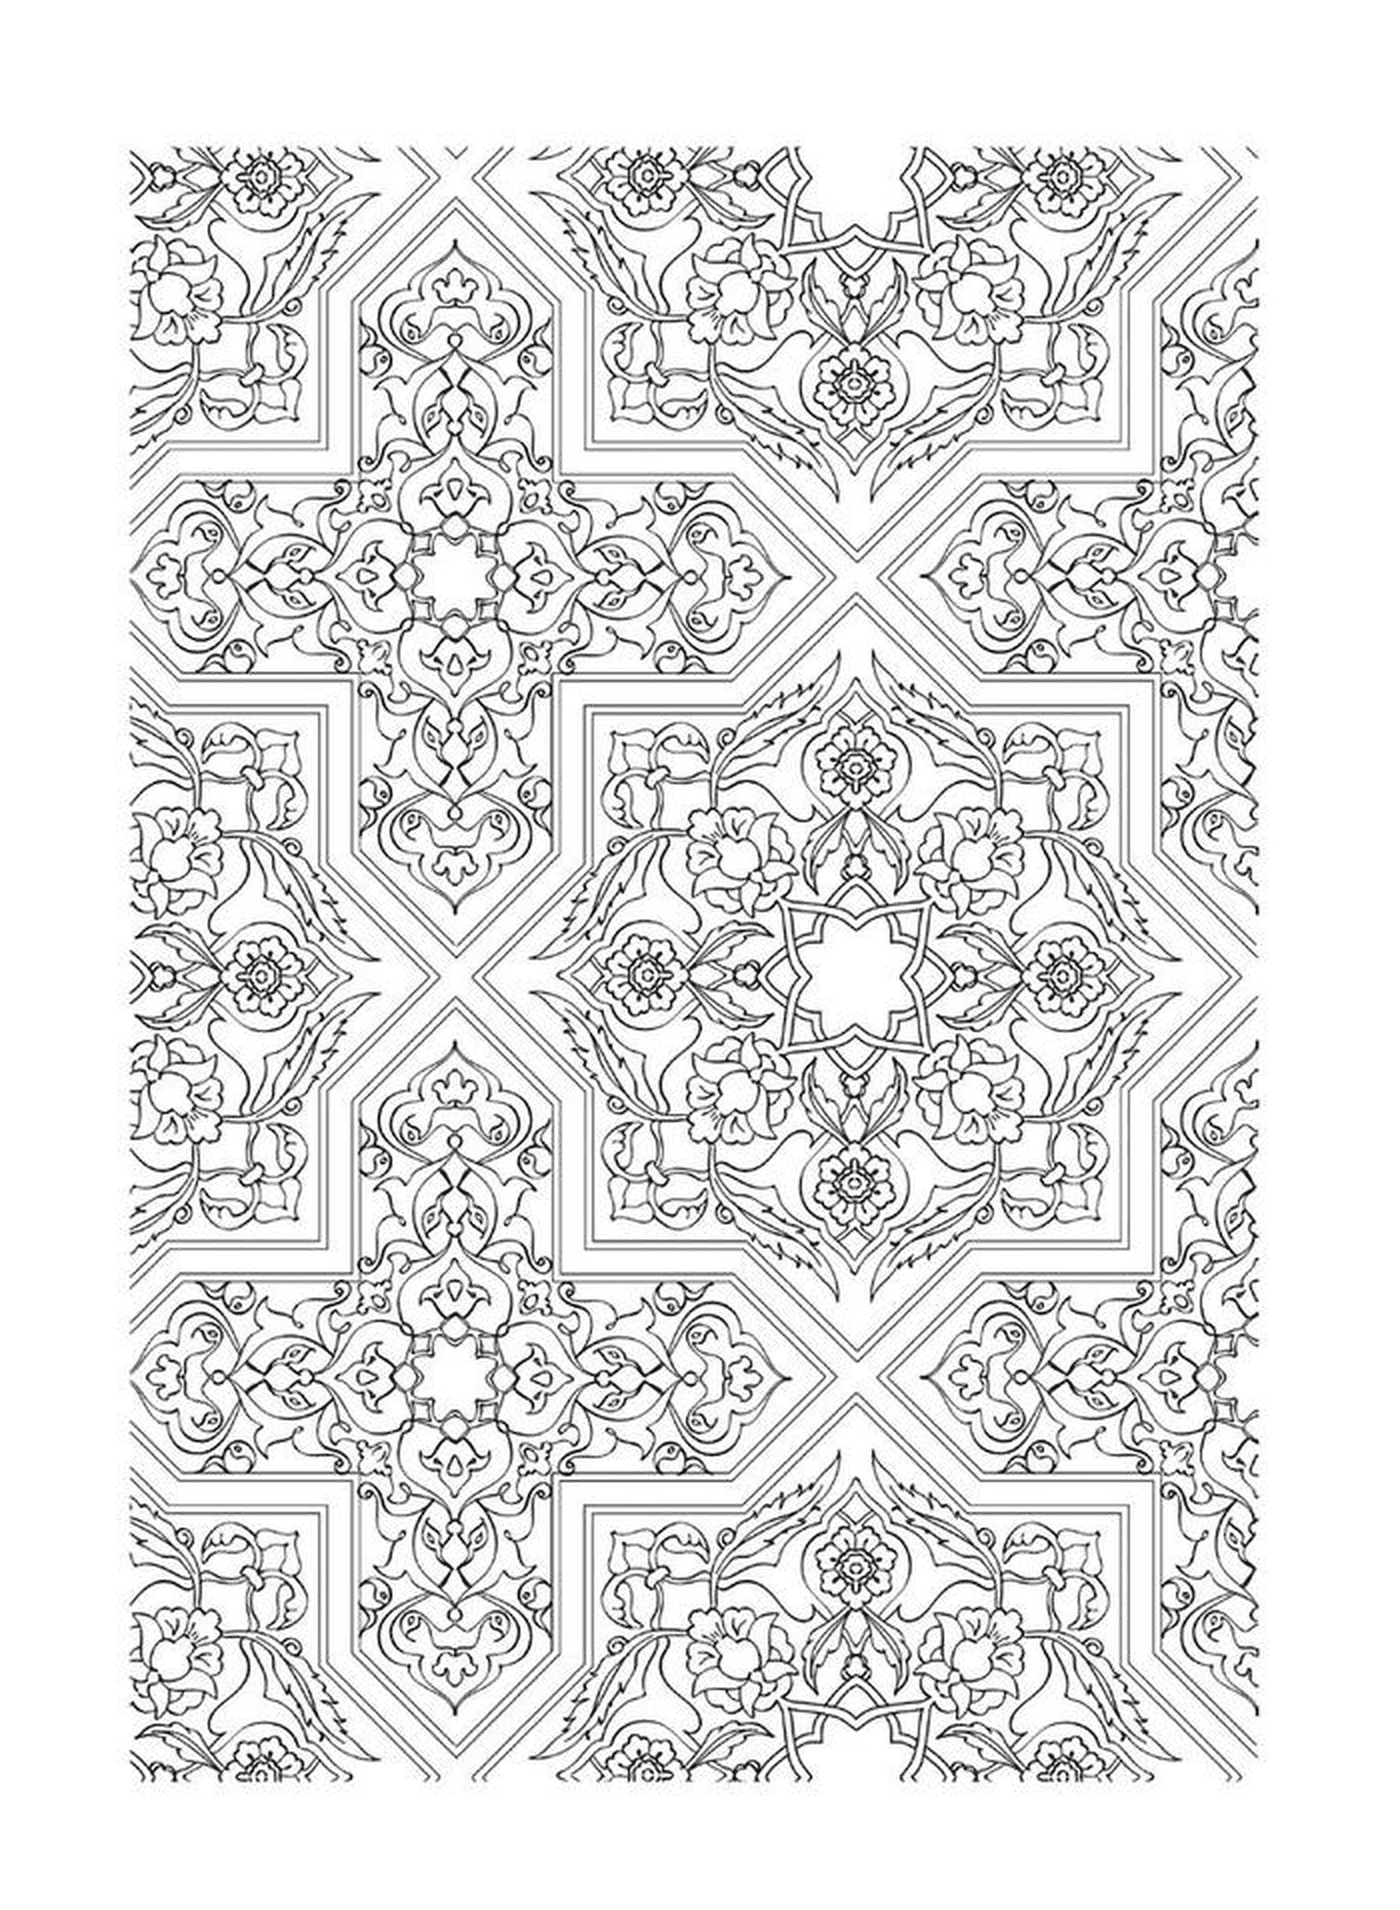  A complex and detailed pattern 